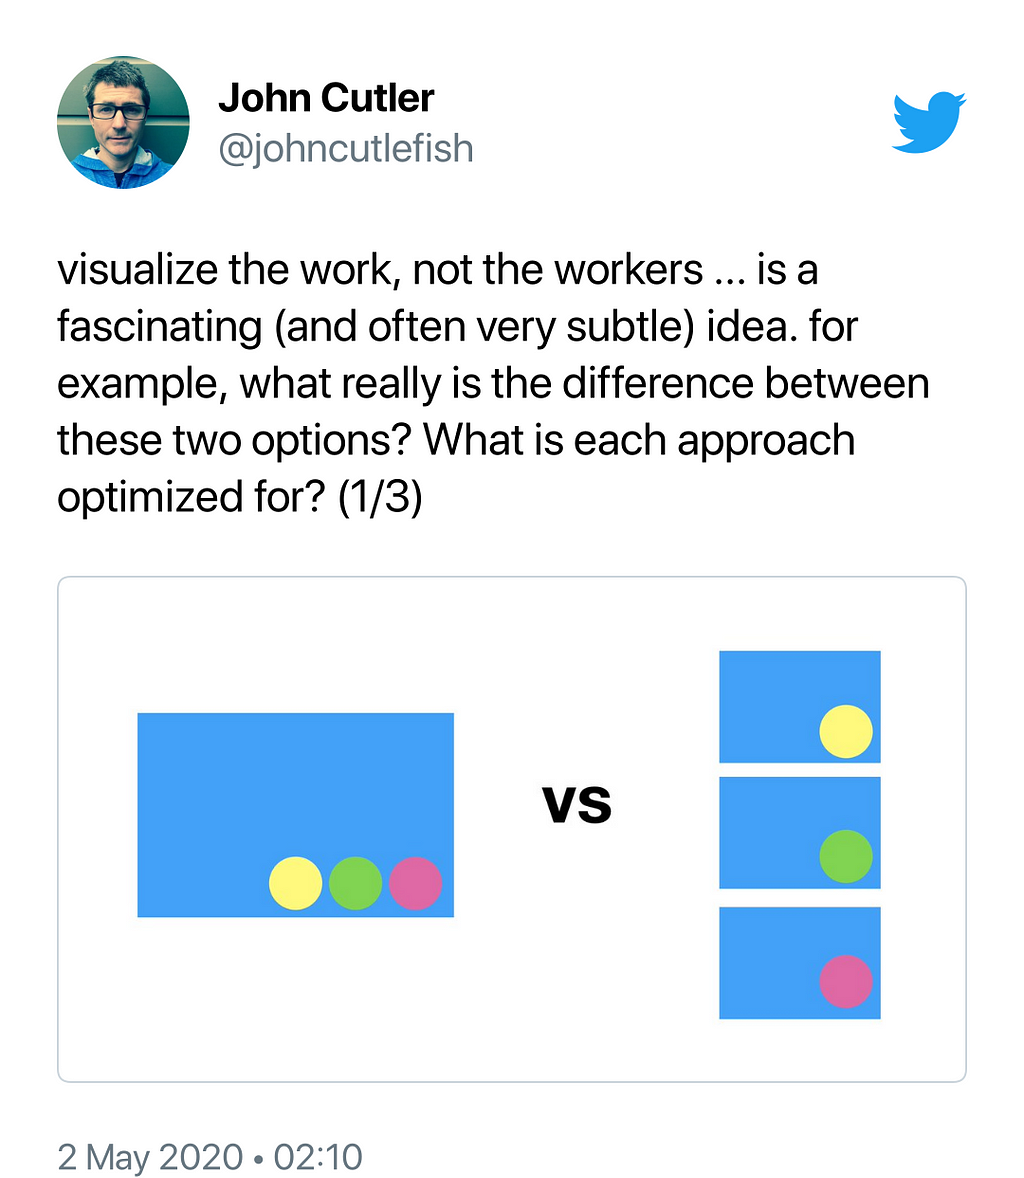 Tweet by John Cutler:visualize the work, not the workers … is a fascinating (and often very subtle) idea. for example, what really is the difference between having only one assignee vs having multiple assignees? What is each approach optimized for?